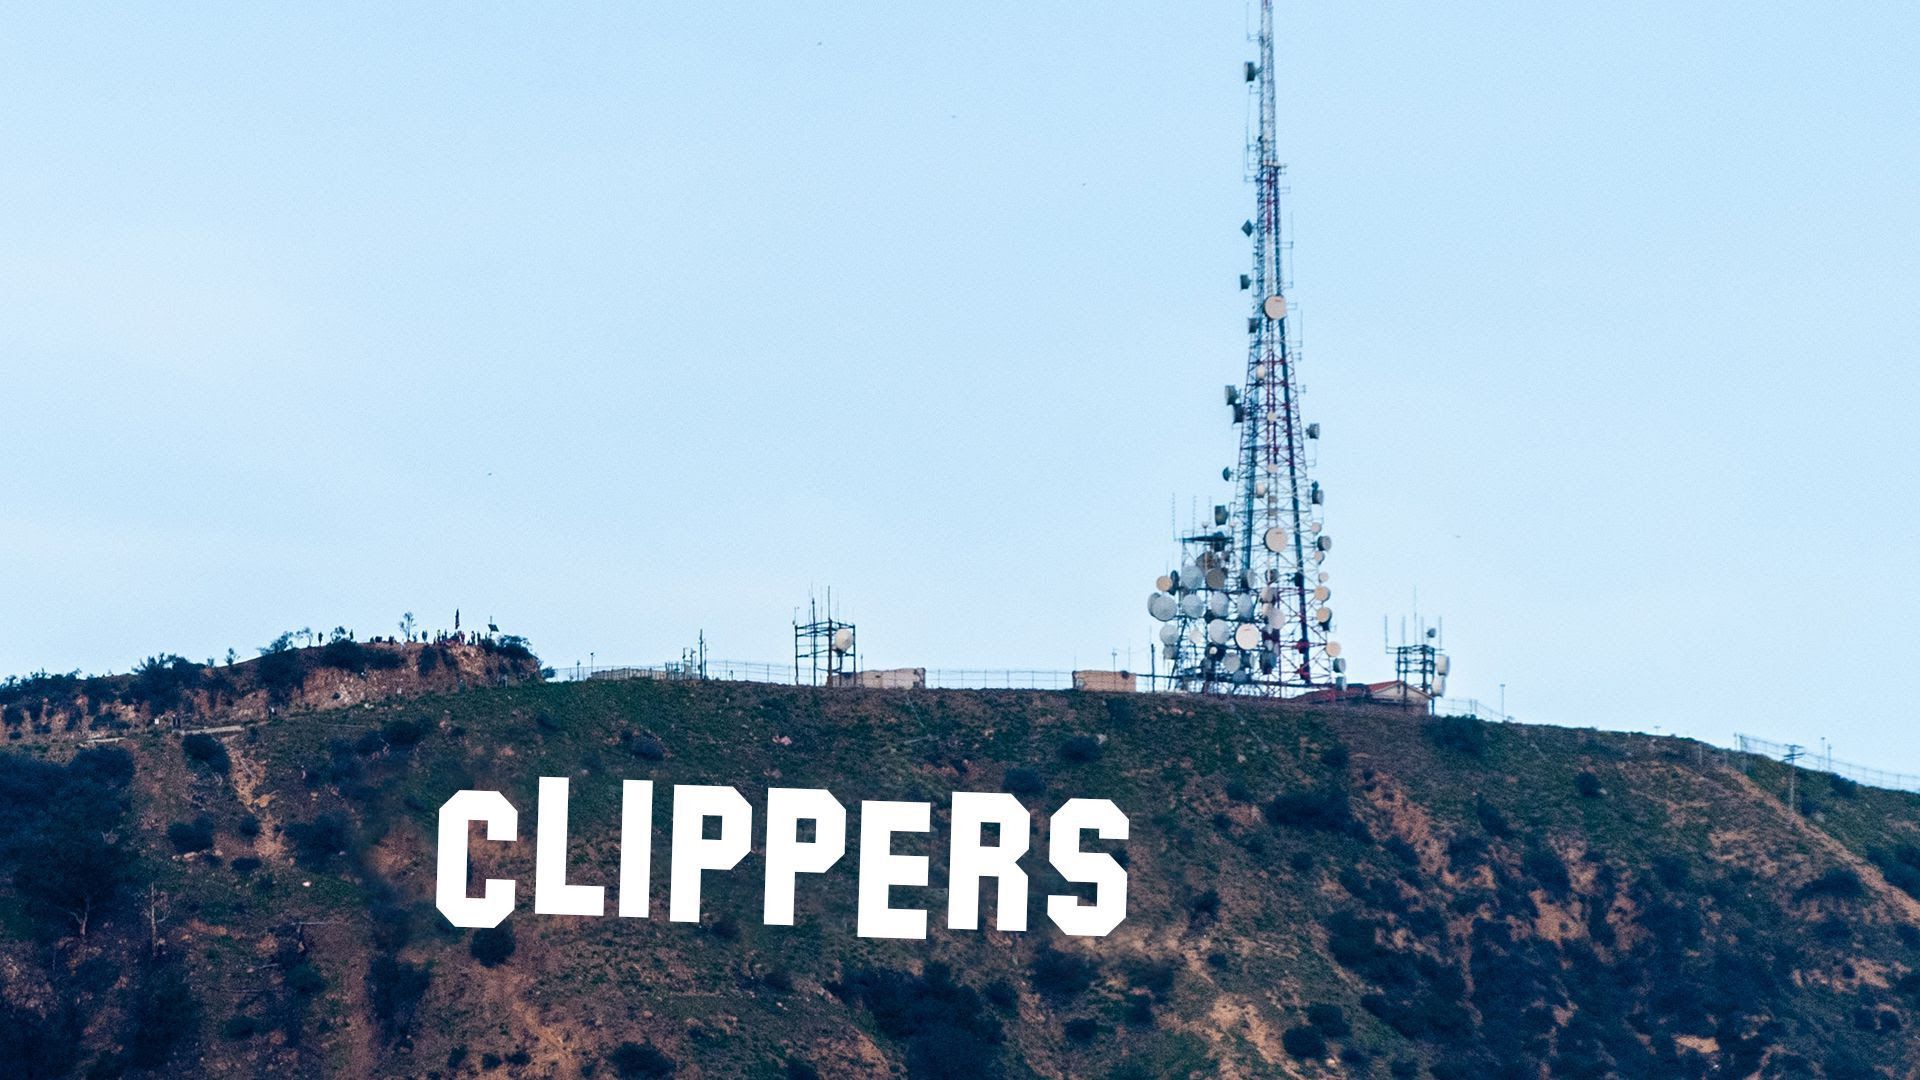 The Clippers team name replacing the Hollywood sign in a photo.